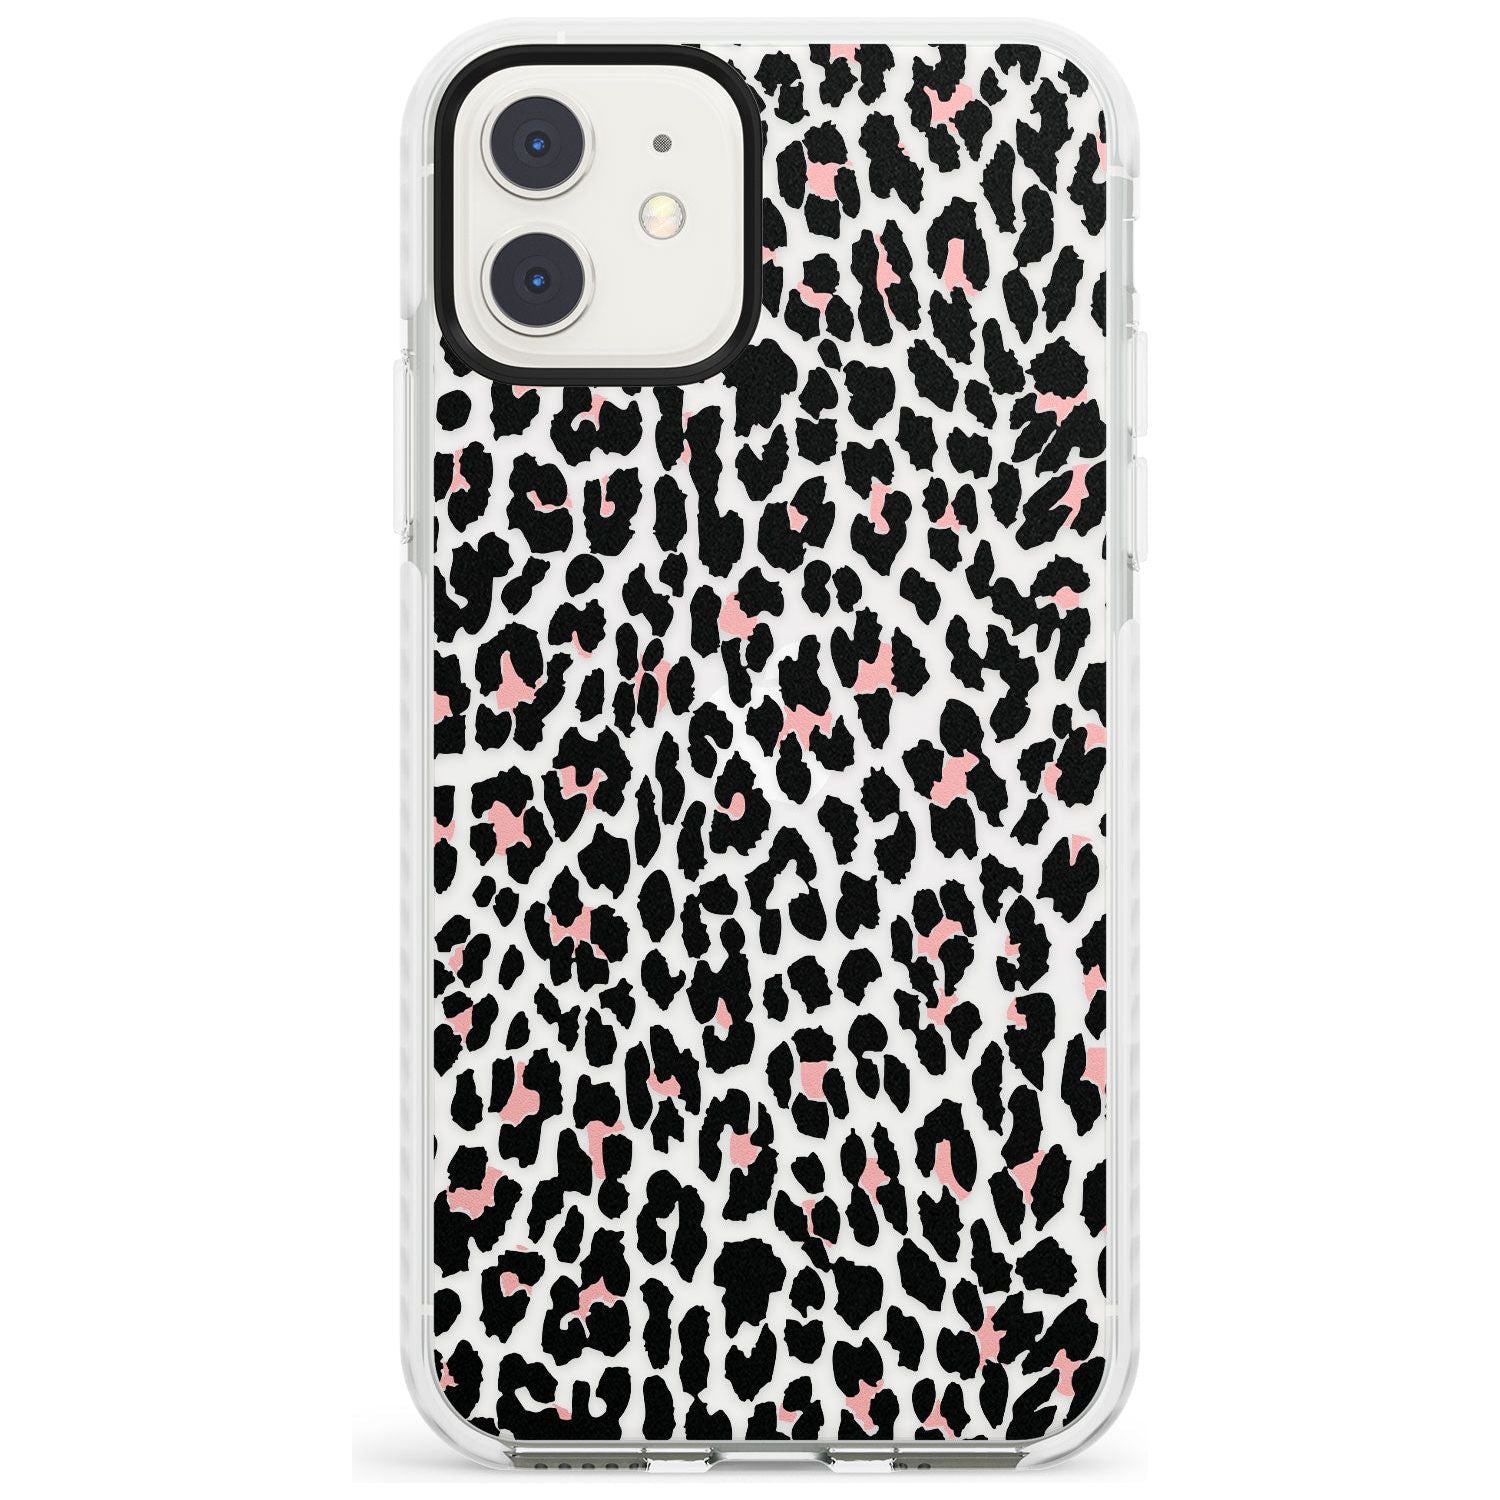 Light Pink Leopard Print - Transparent Impact Phone Case for iPhone 11